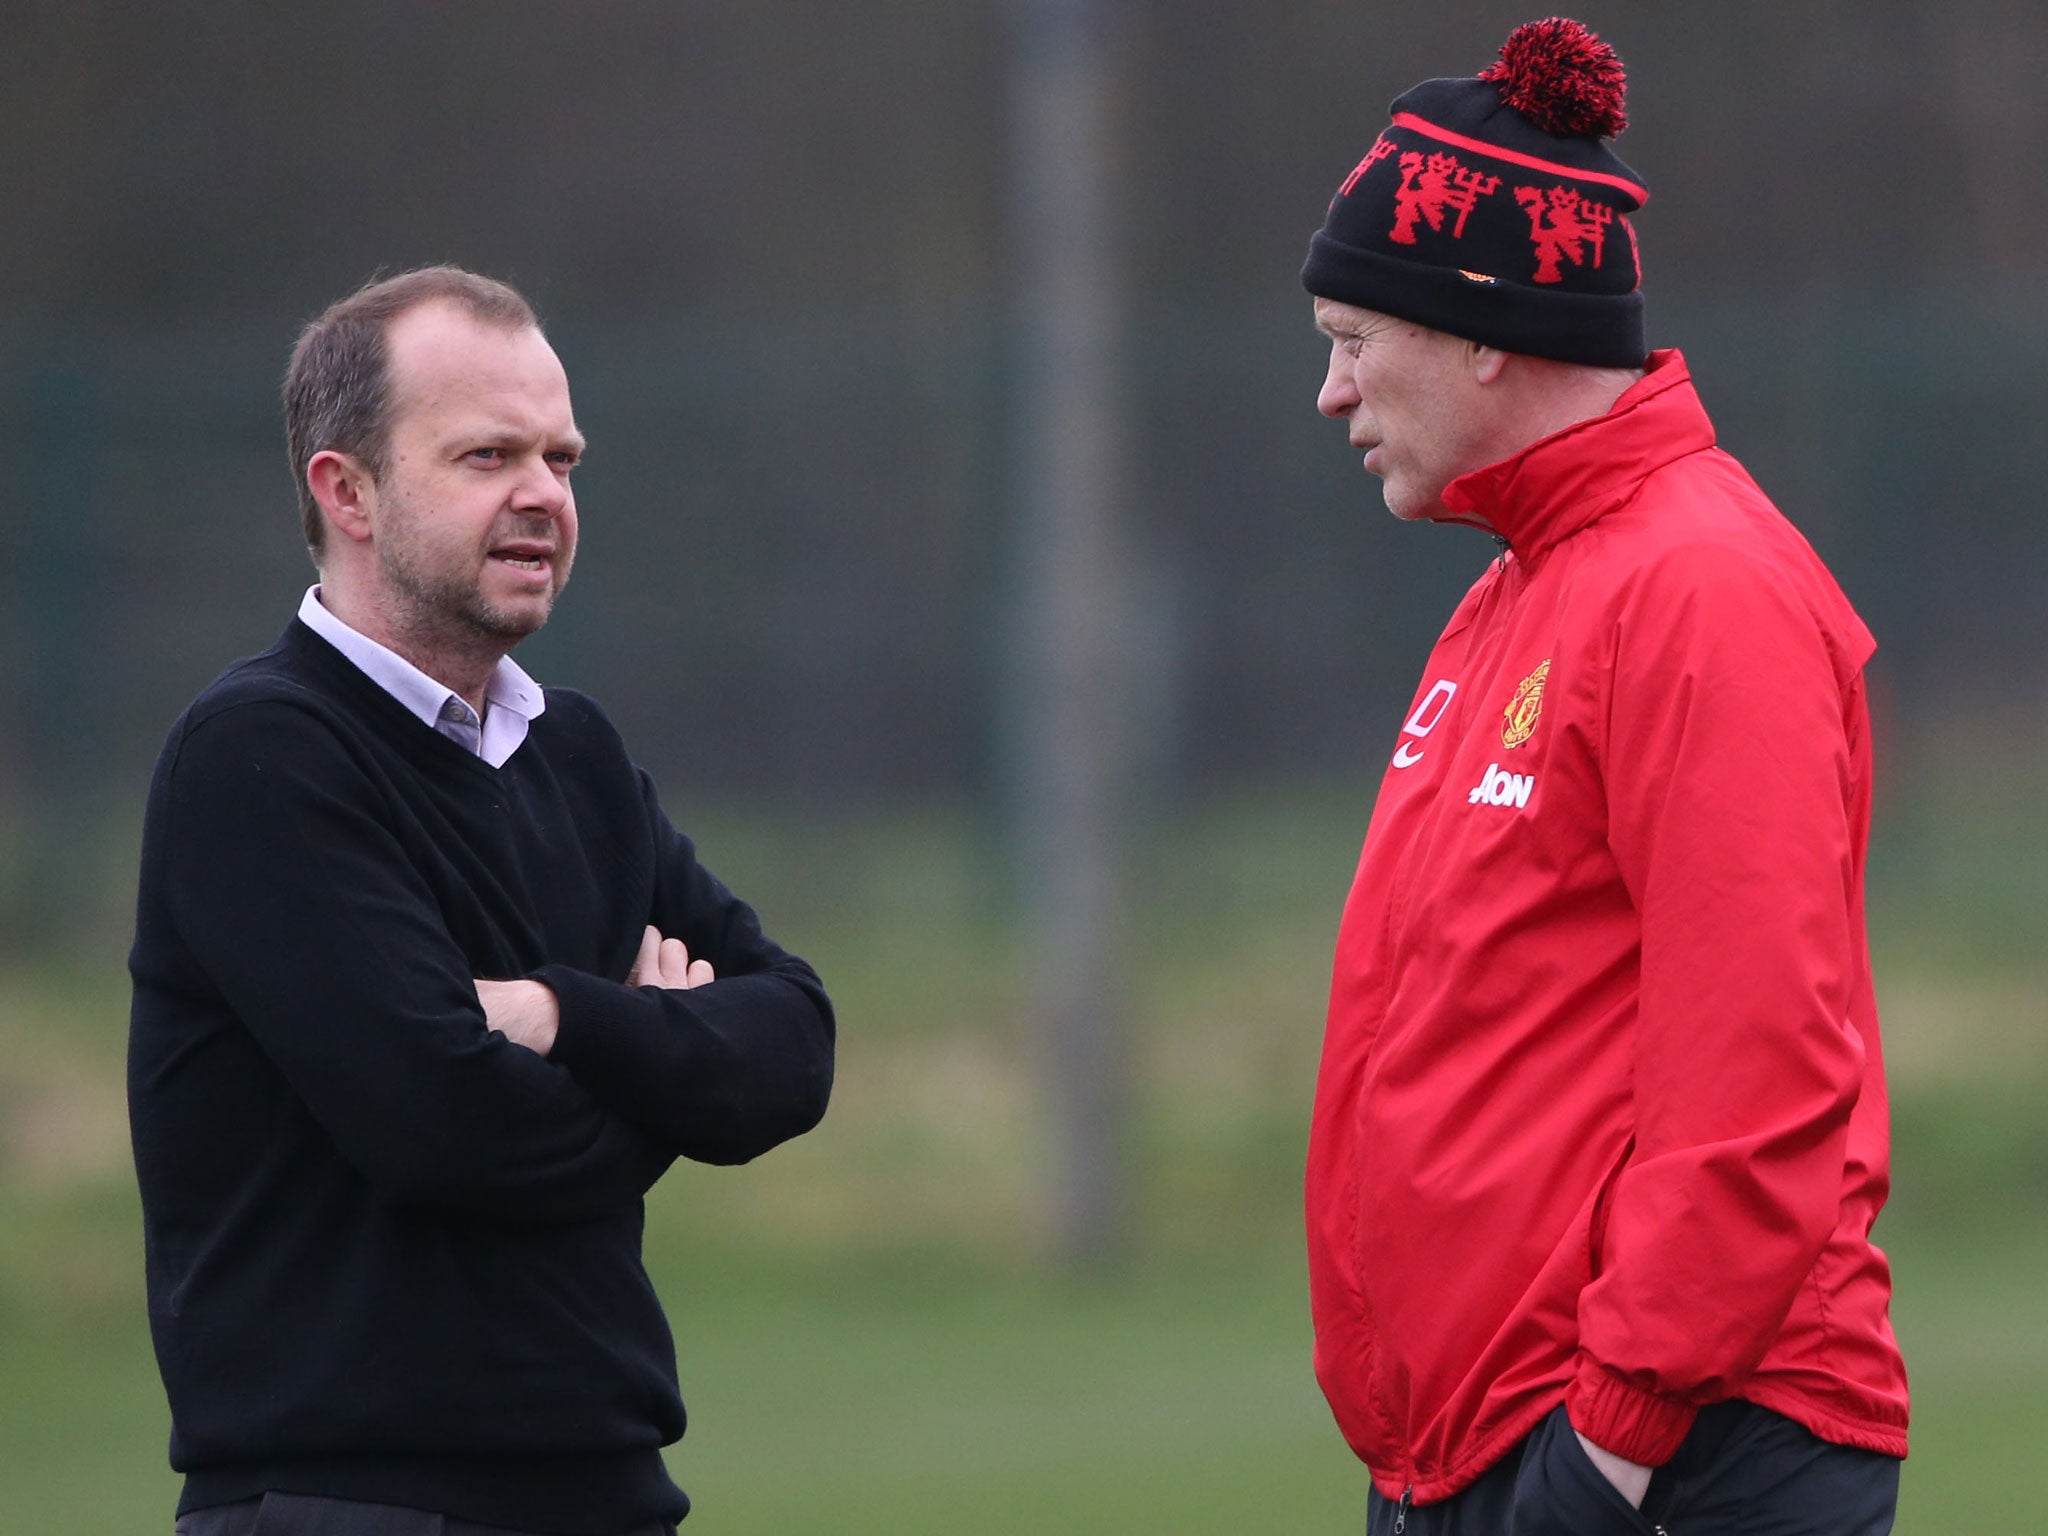 Manchester United executive vice-chairman Ed Woodward speaks with manager David Moyes